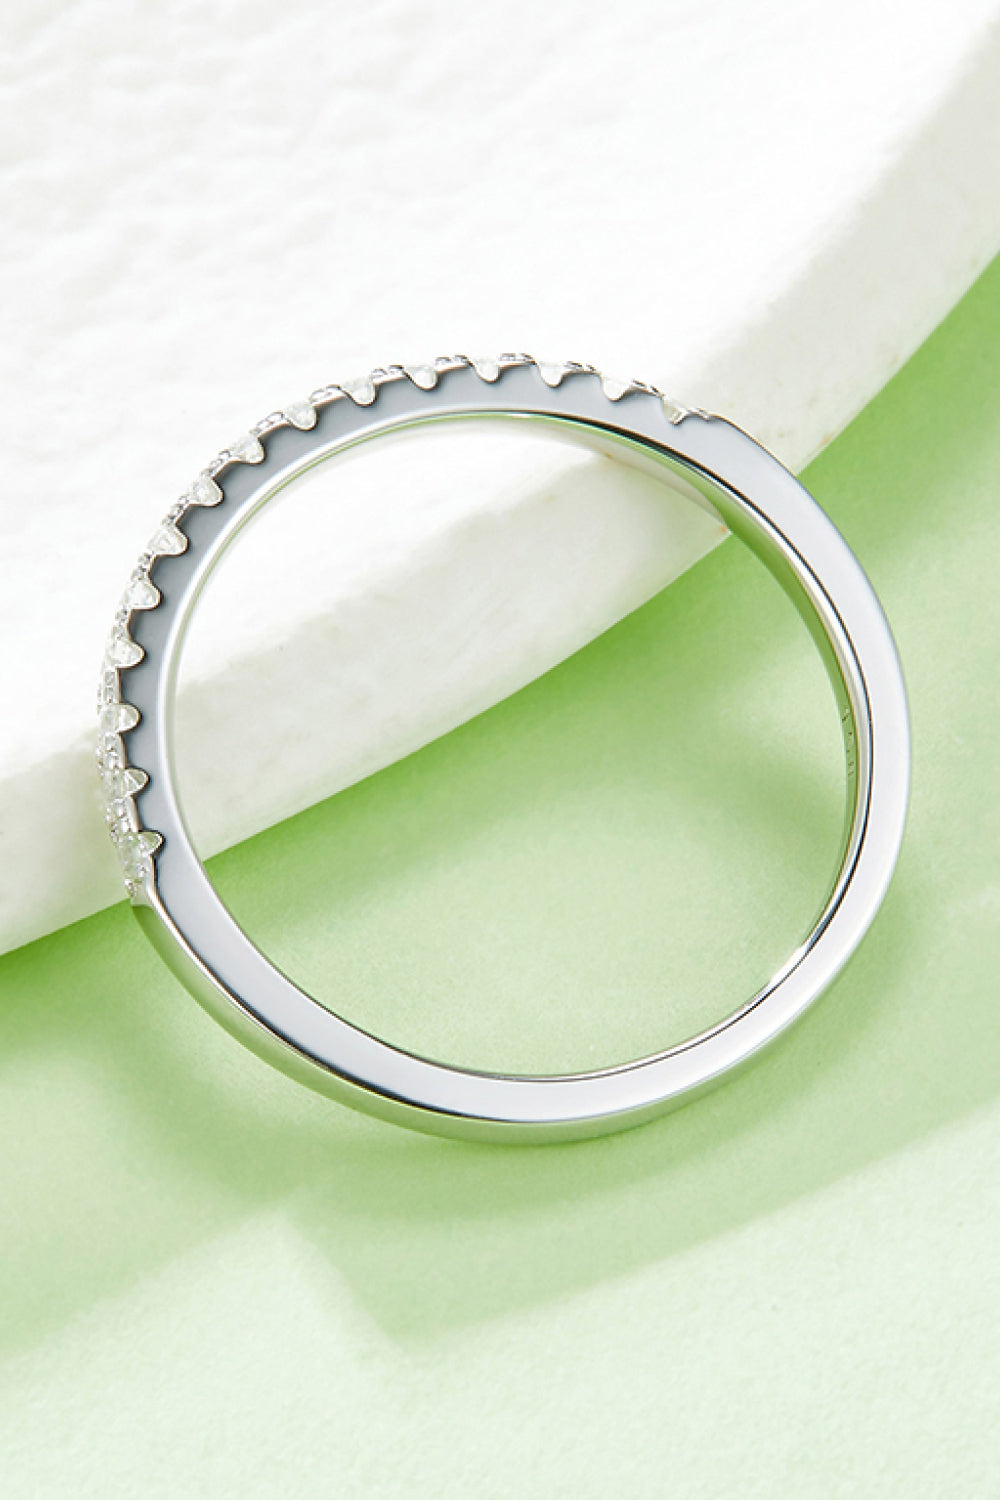 Moissanite Platinum-Plated Half-Eternity Ring-Rings-Inspired by Justeen-Women's Clothing Boutique in Chicago, Illinois